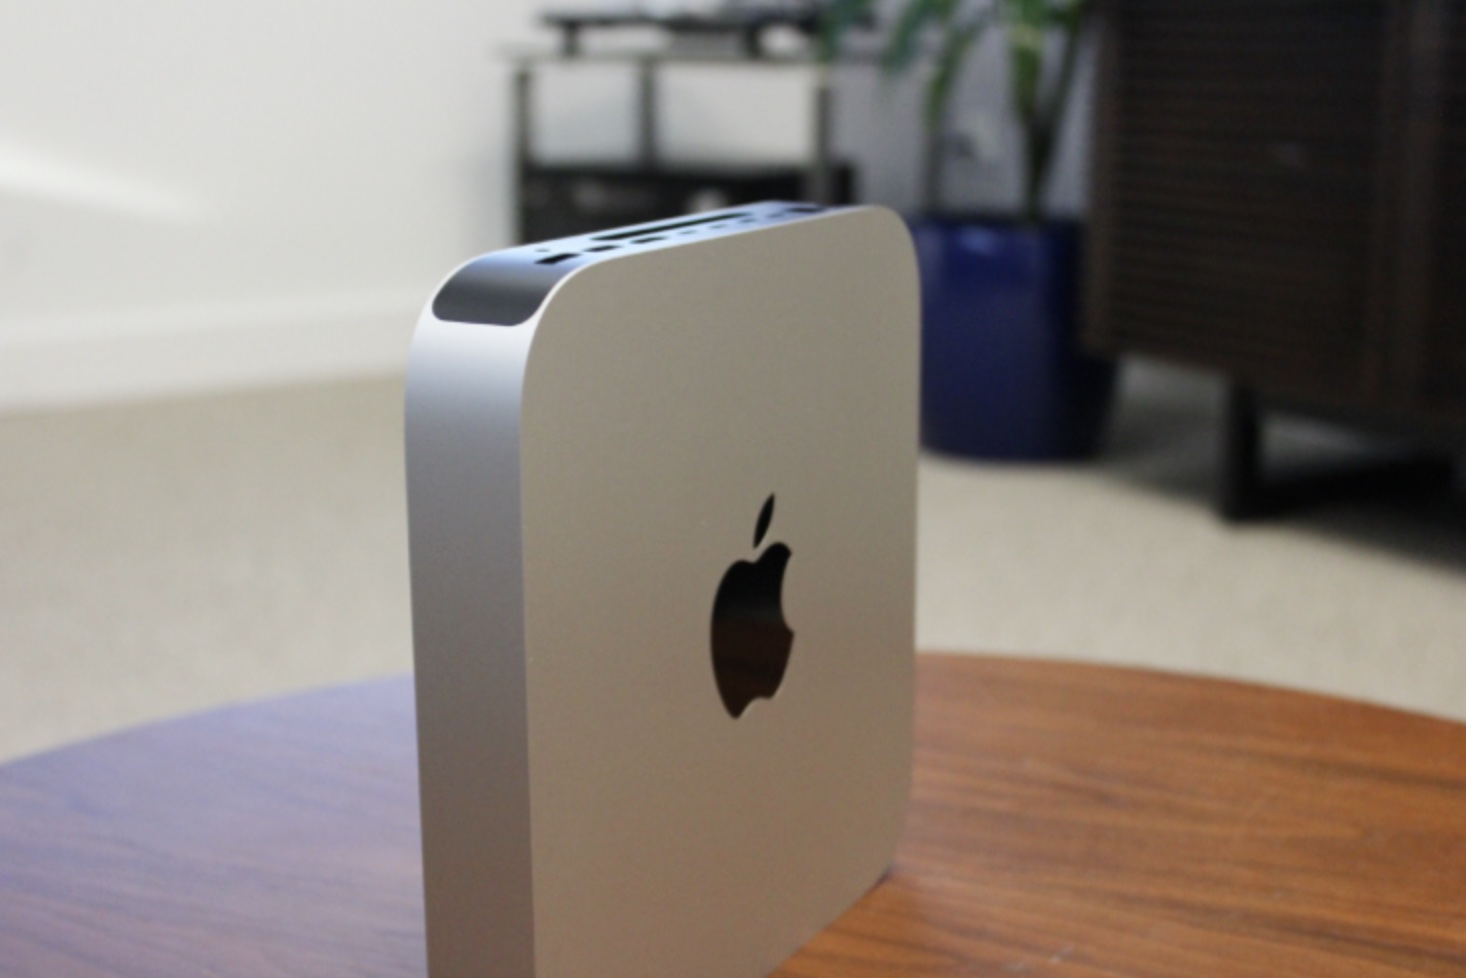 Mac mini standing up on its side.